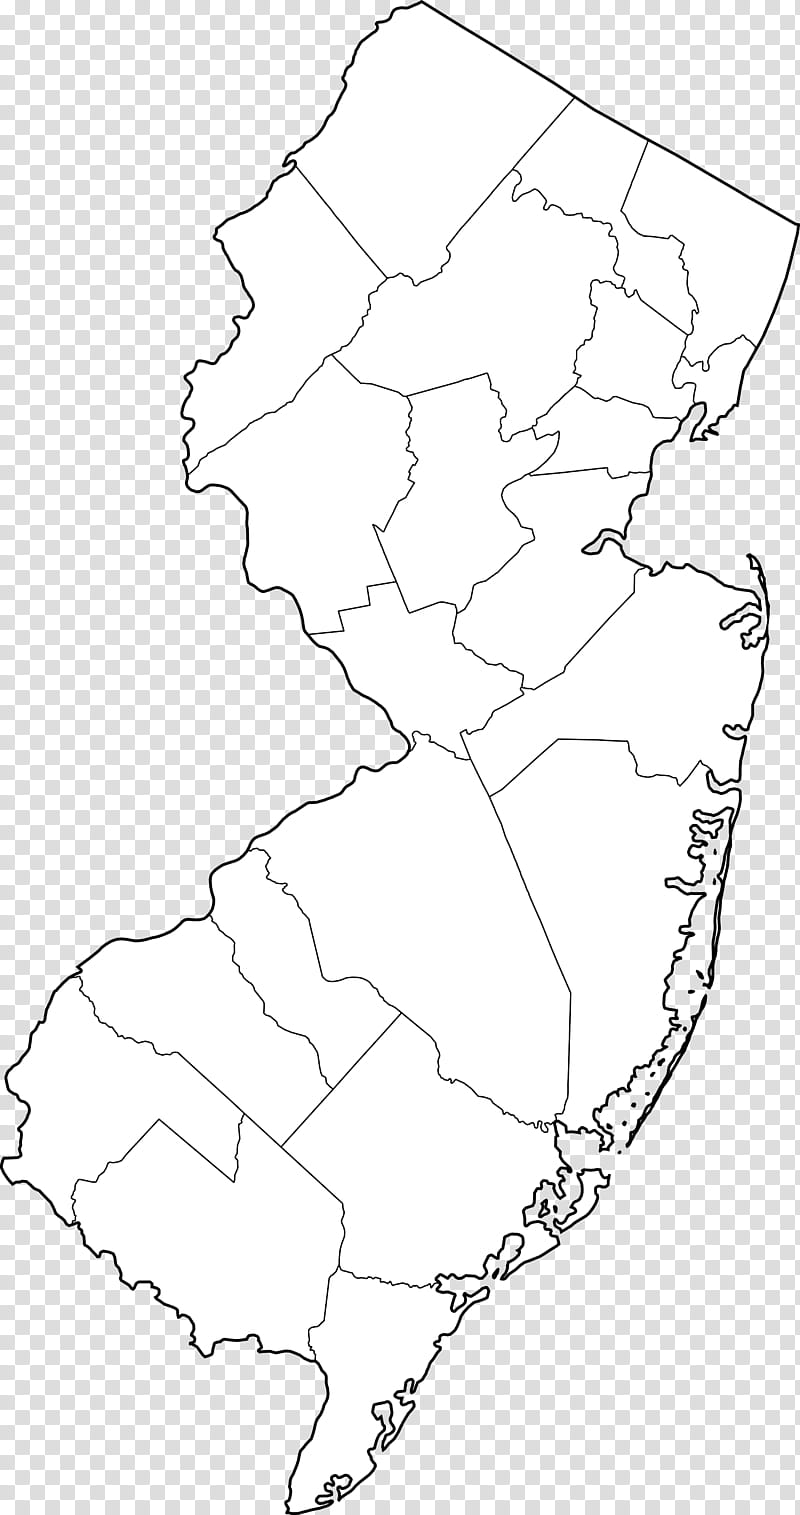 Bergen County New Jersey White, Burlington County New Jersey, Essex County New Jersey, Somerset County New Jersey, Union County New Jersey, Middlesex County New Jersey, Hunterdon County New Jersey, Passaic County New Jersey transparent background PNG clipart